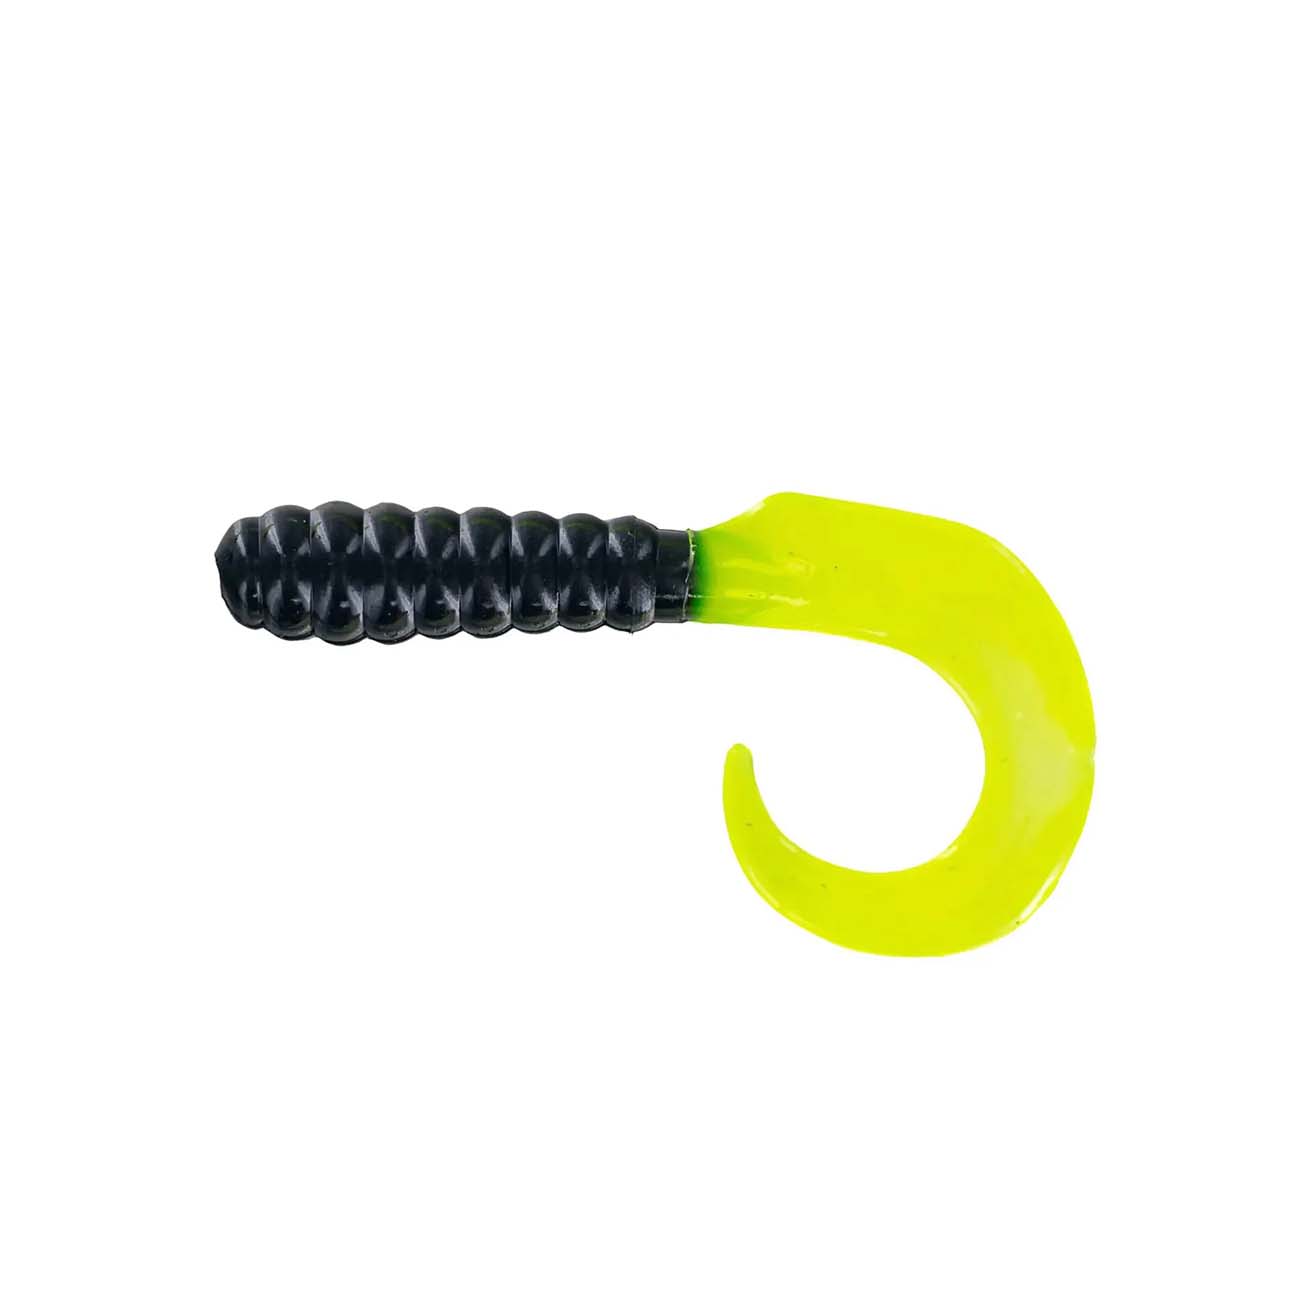 Crawishcrawfish Soft Bait Lure 2-pack - Jointed Paddle Tail For